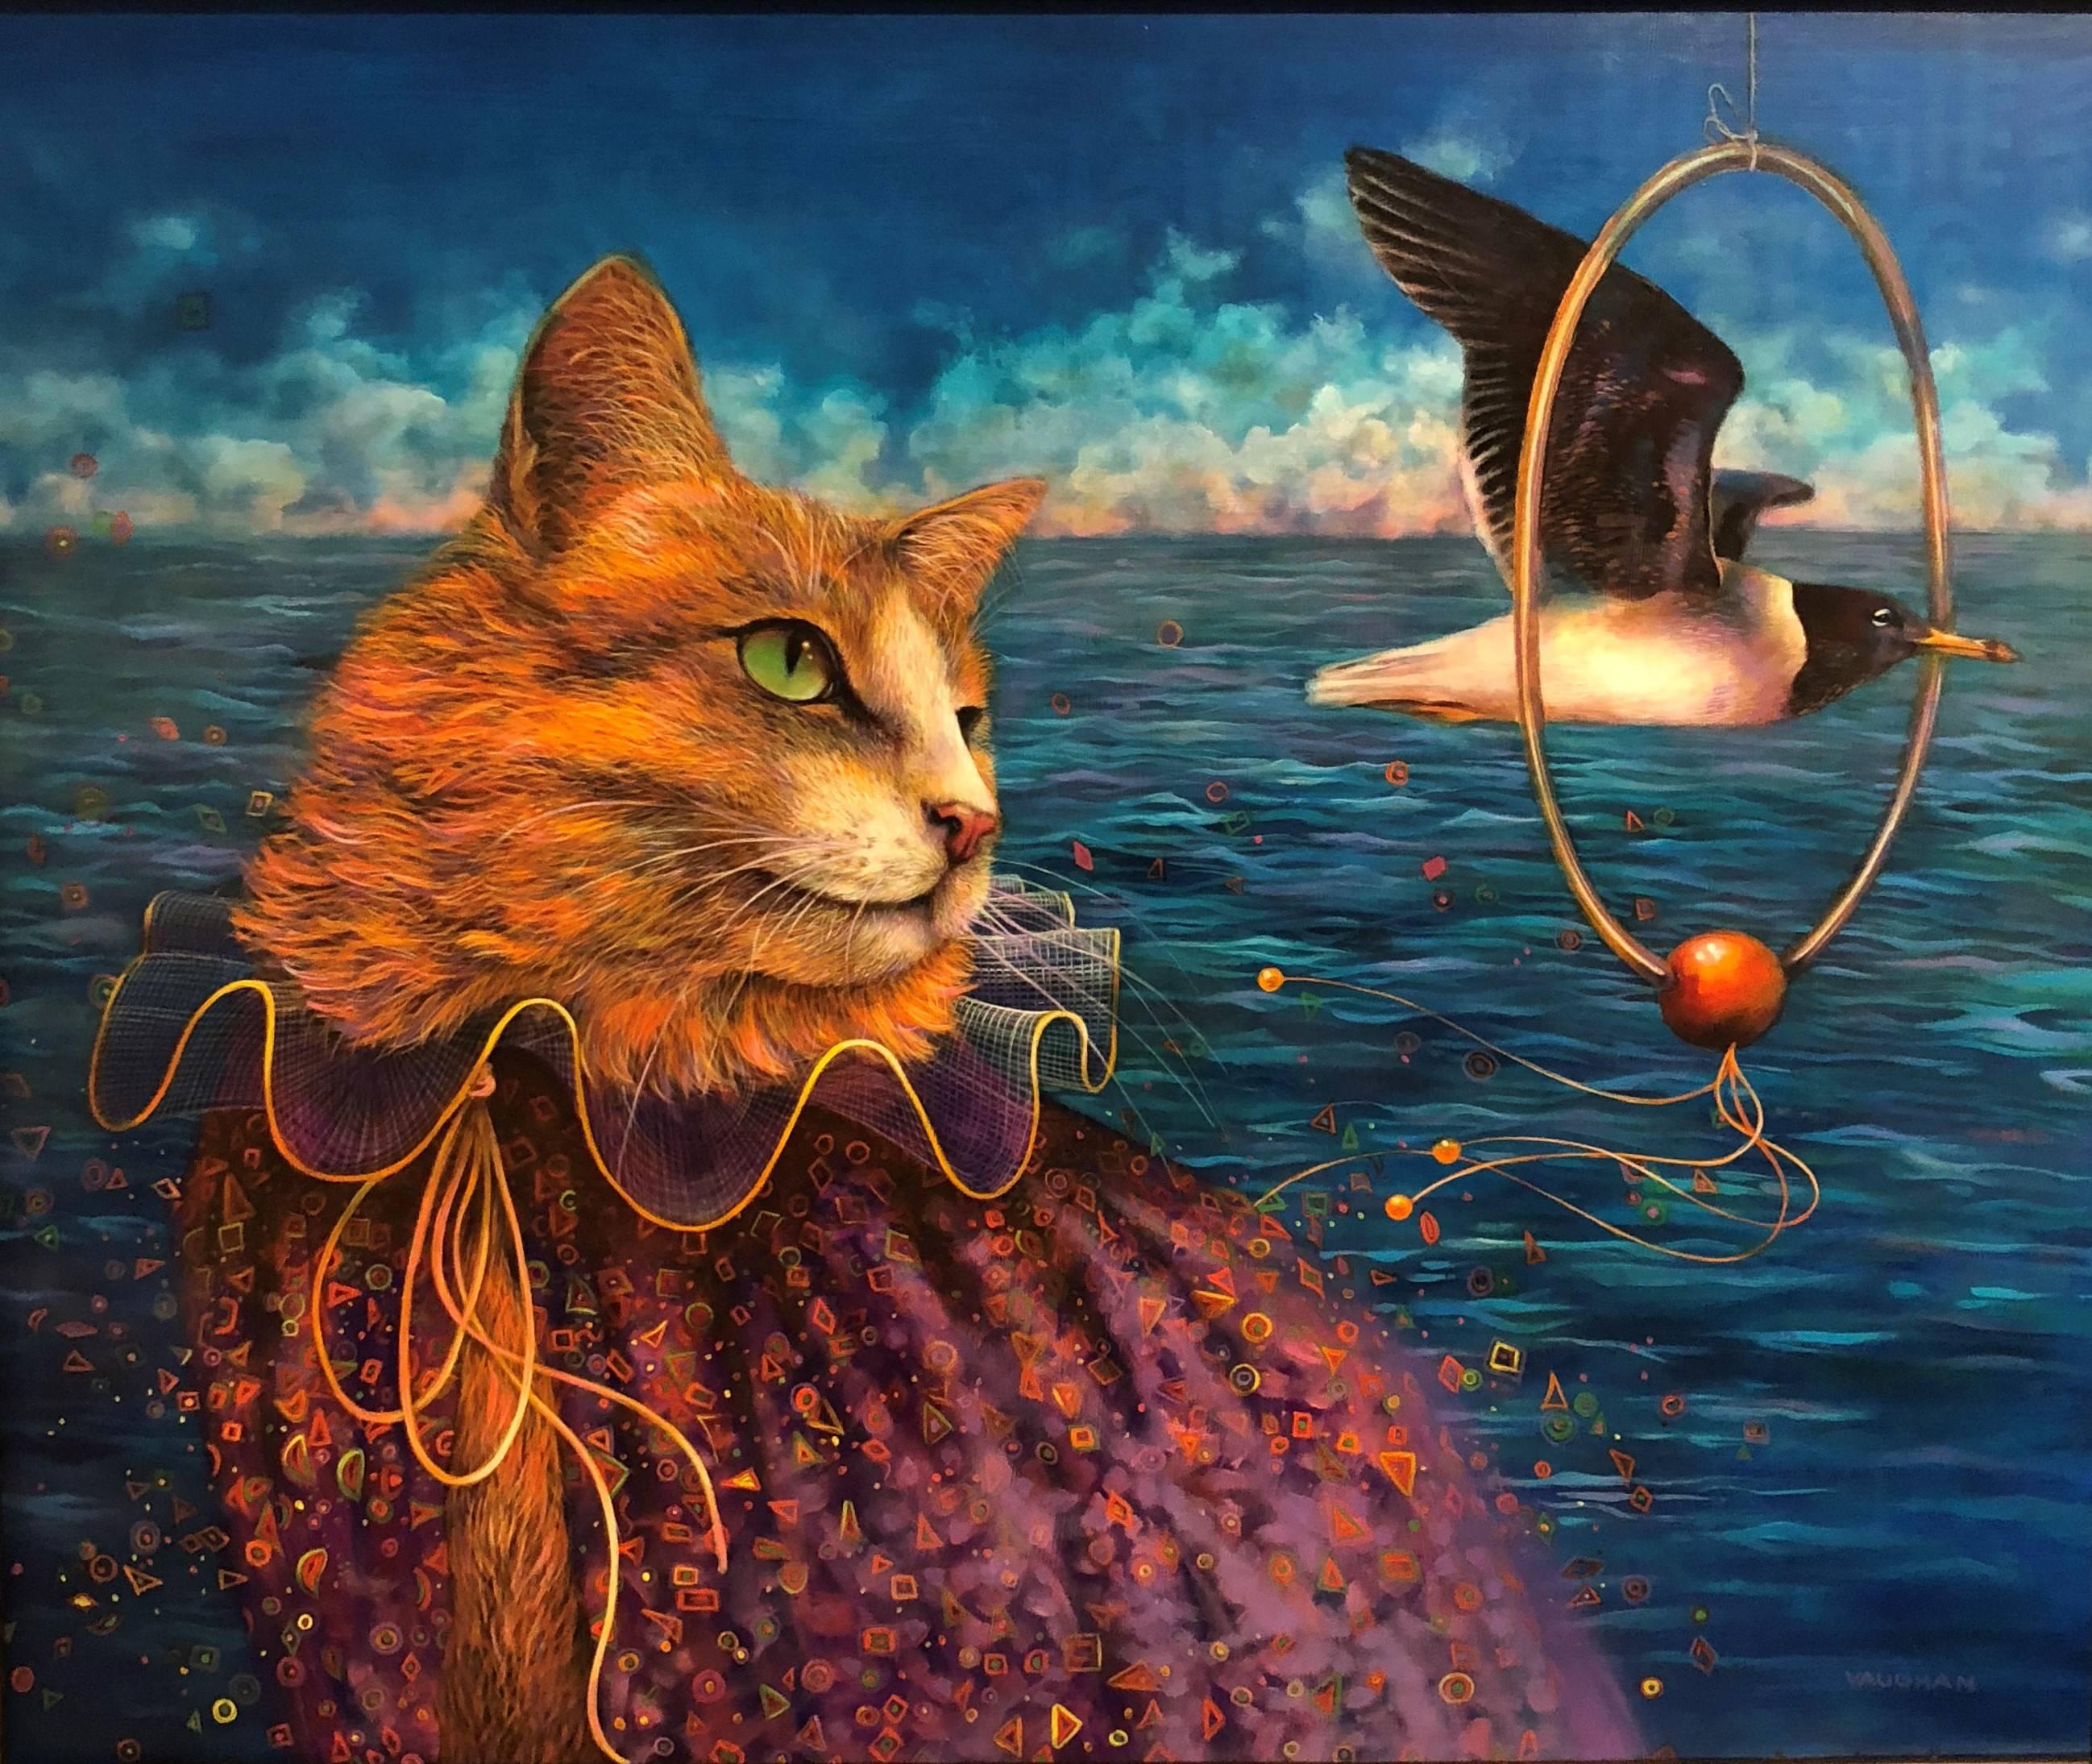 Wendy Vaughan Animal Painting - Tricks - Original Oil Painting, Anthropomorphic Scene with Cat and Seagull